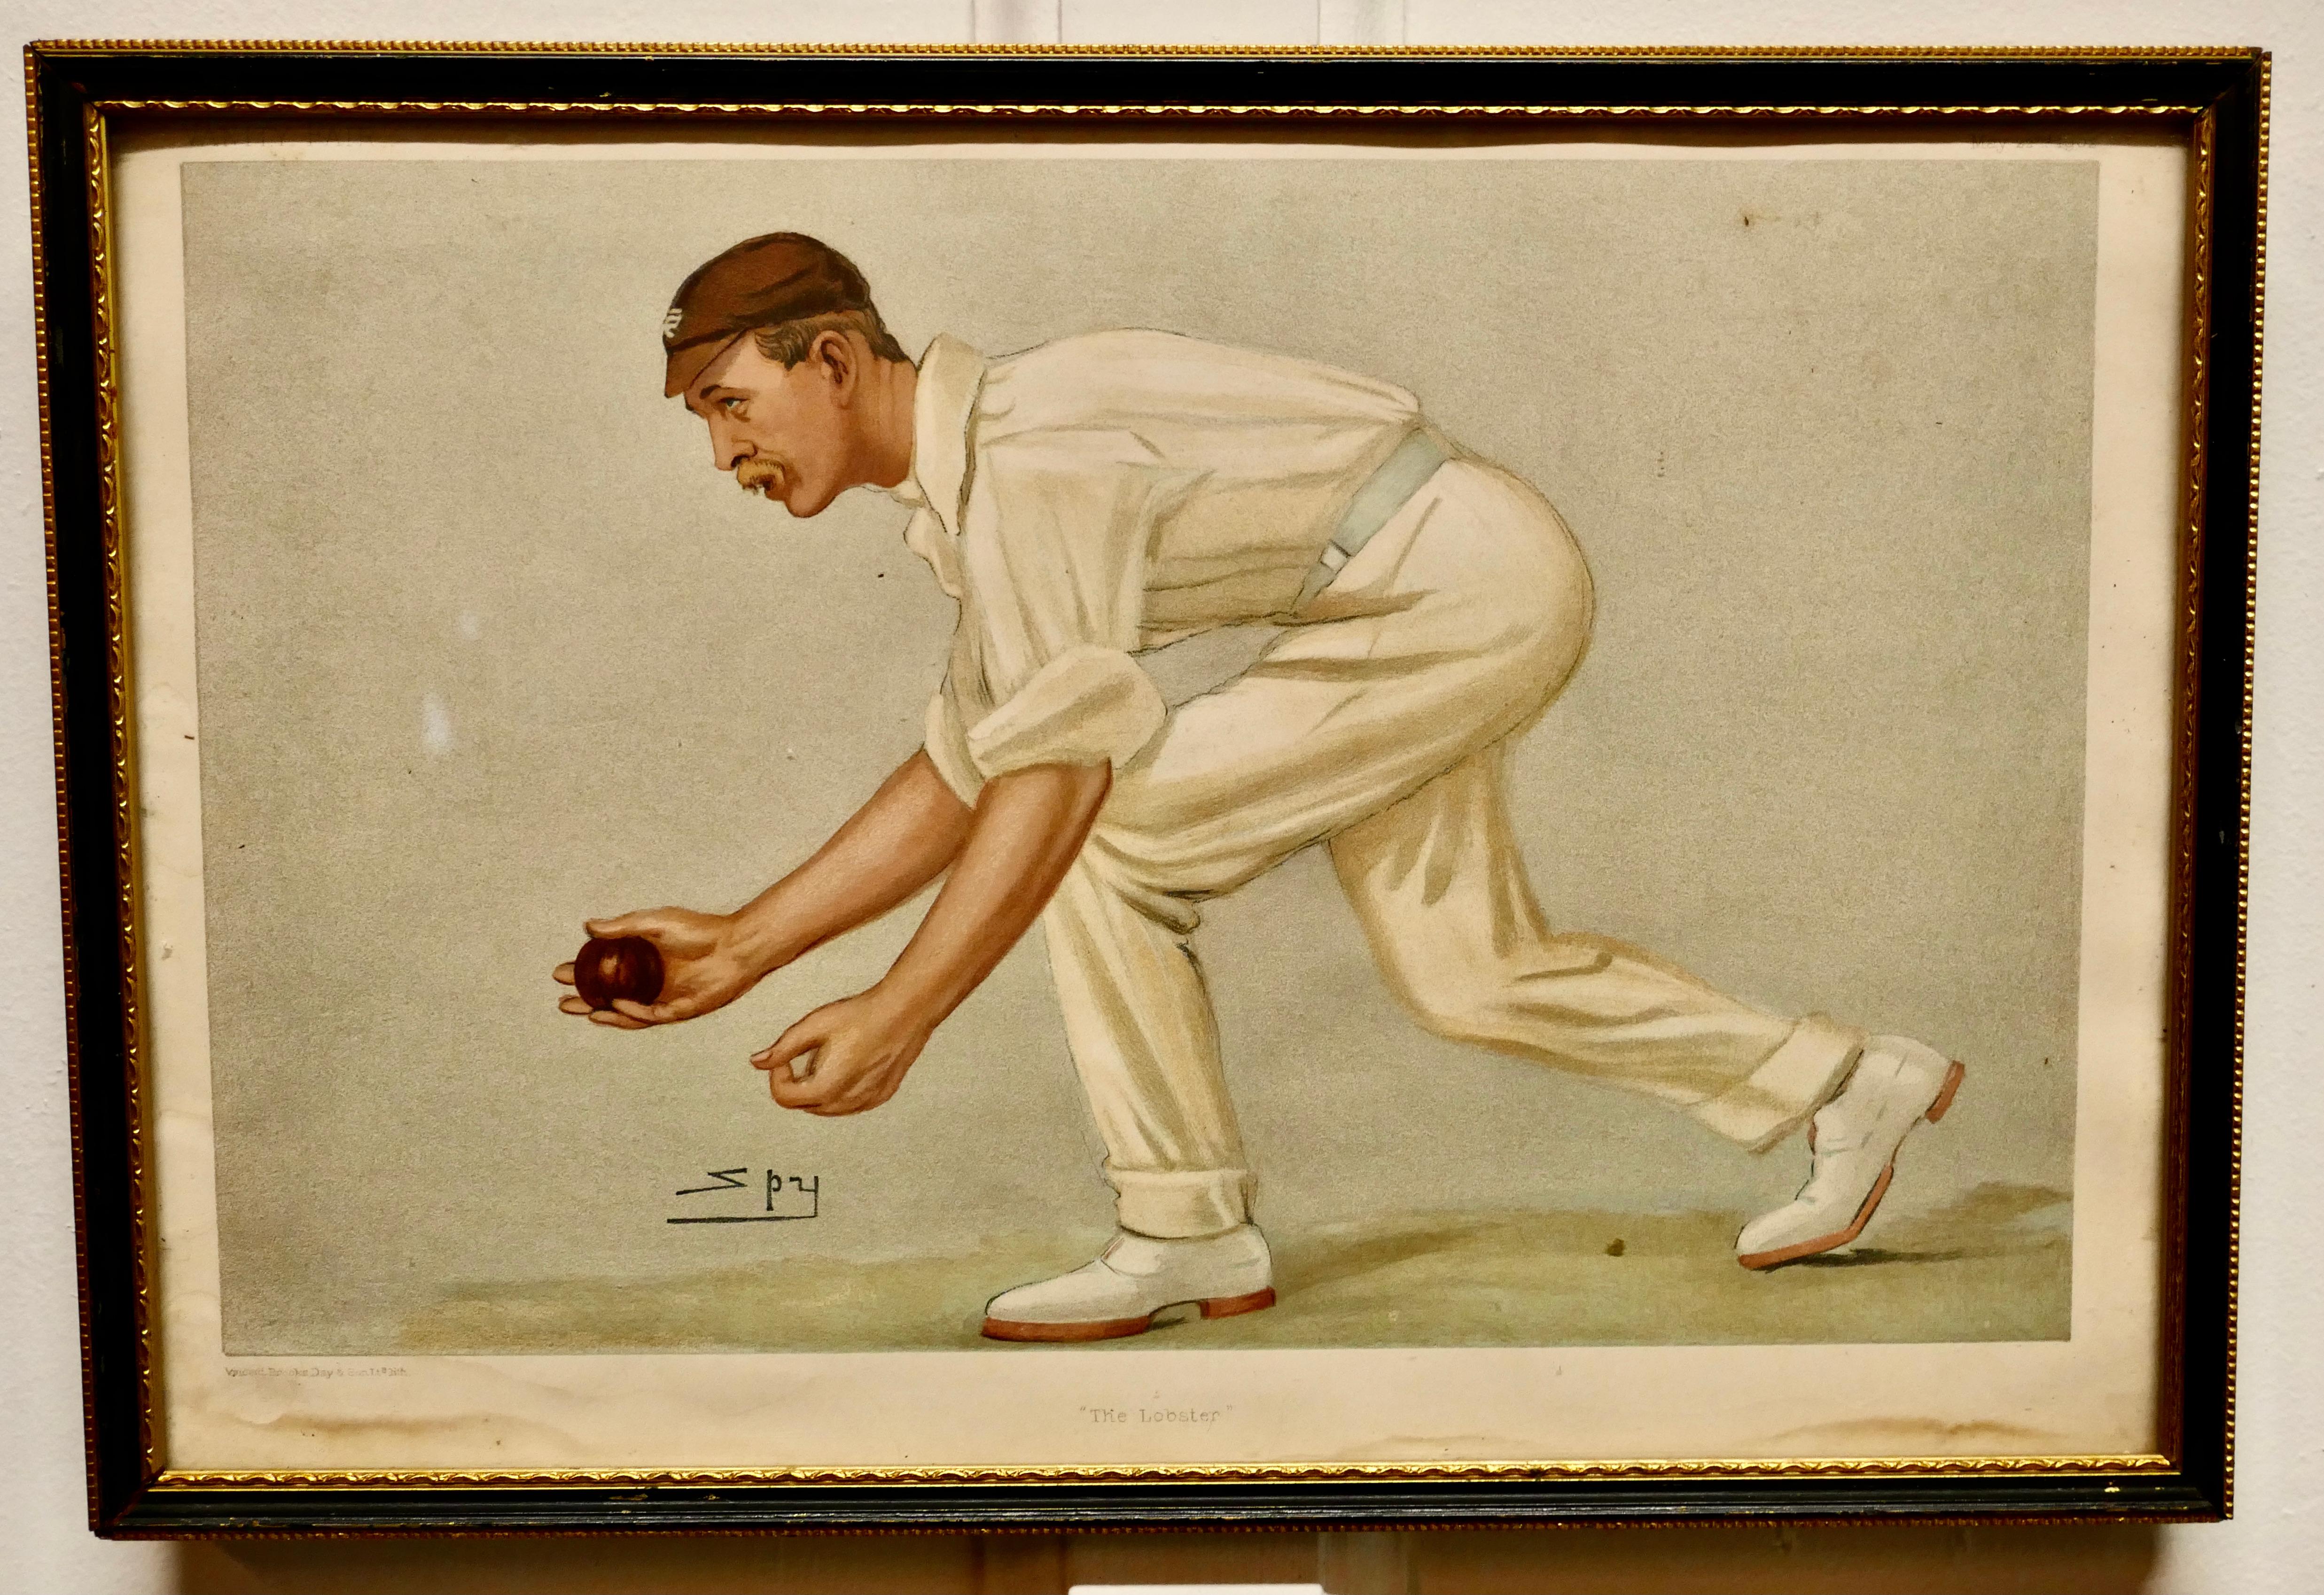 Collection of 4 Vanity Fair cricketing themed “Spy” prints

A rare collection of original colored lithograph prints the earliest dating from 1888-1904, mounted and glazed in original Hogarth frames 

One of the frames has a letter taped to the